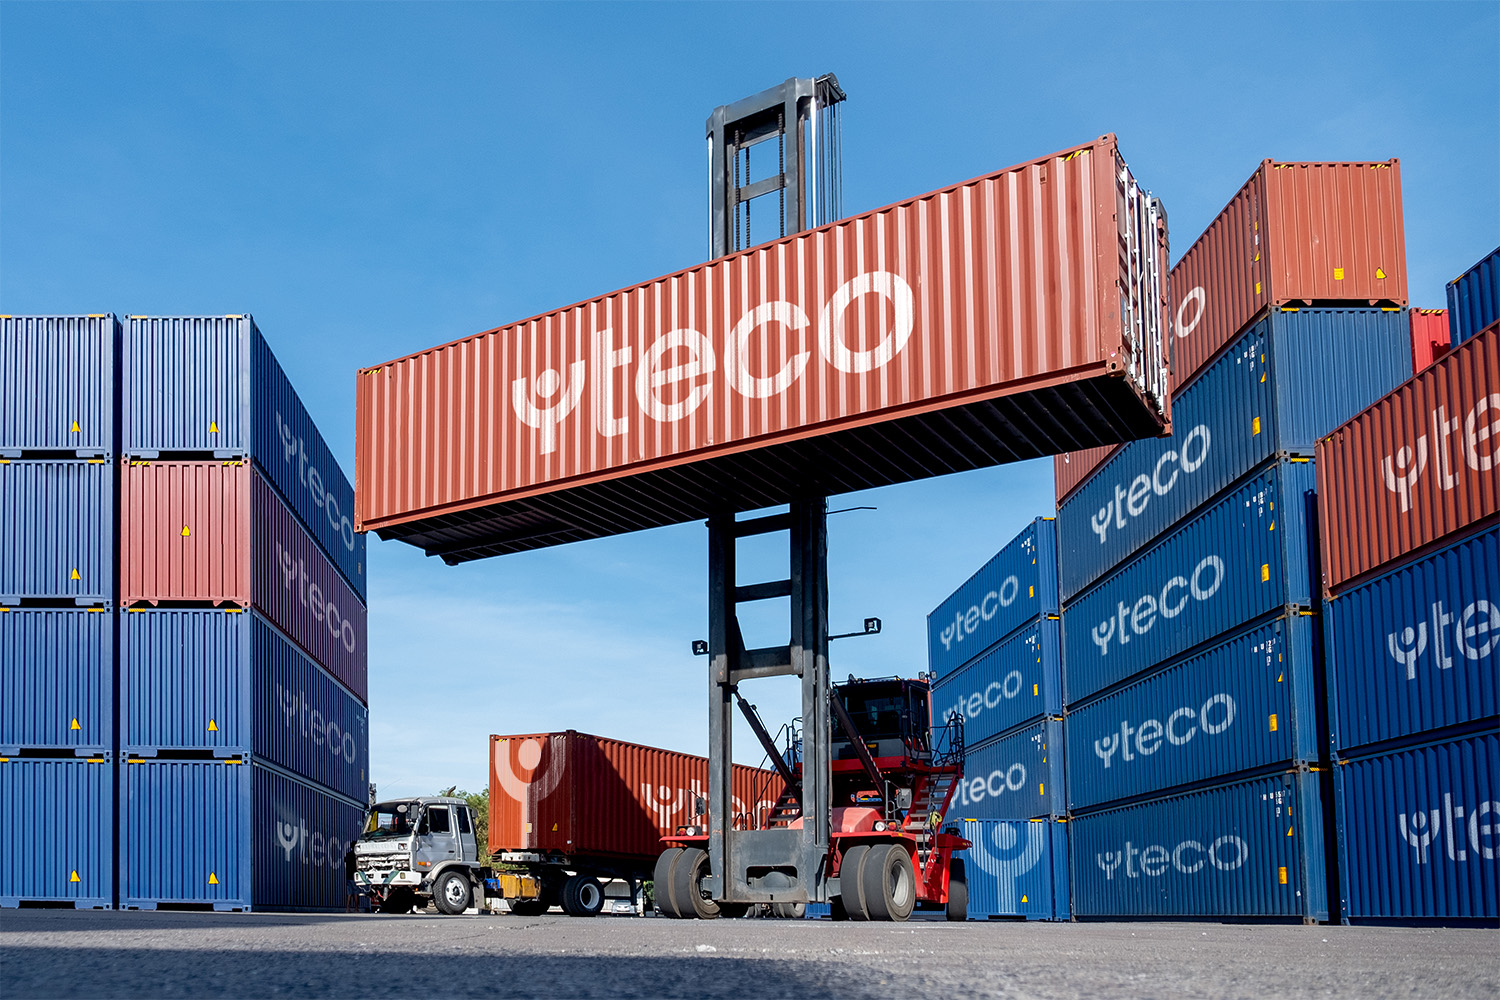 YTECO containers design mockup